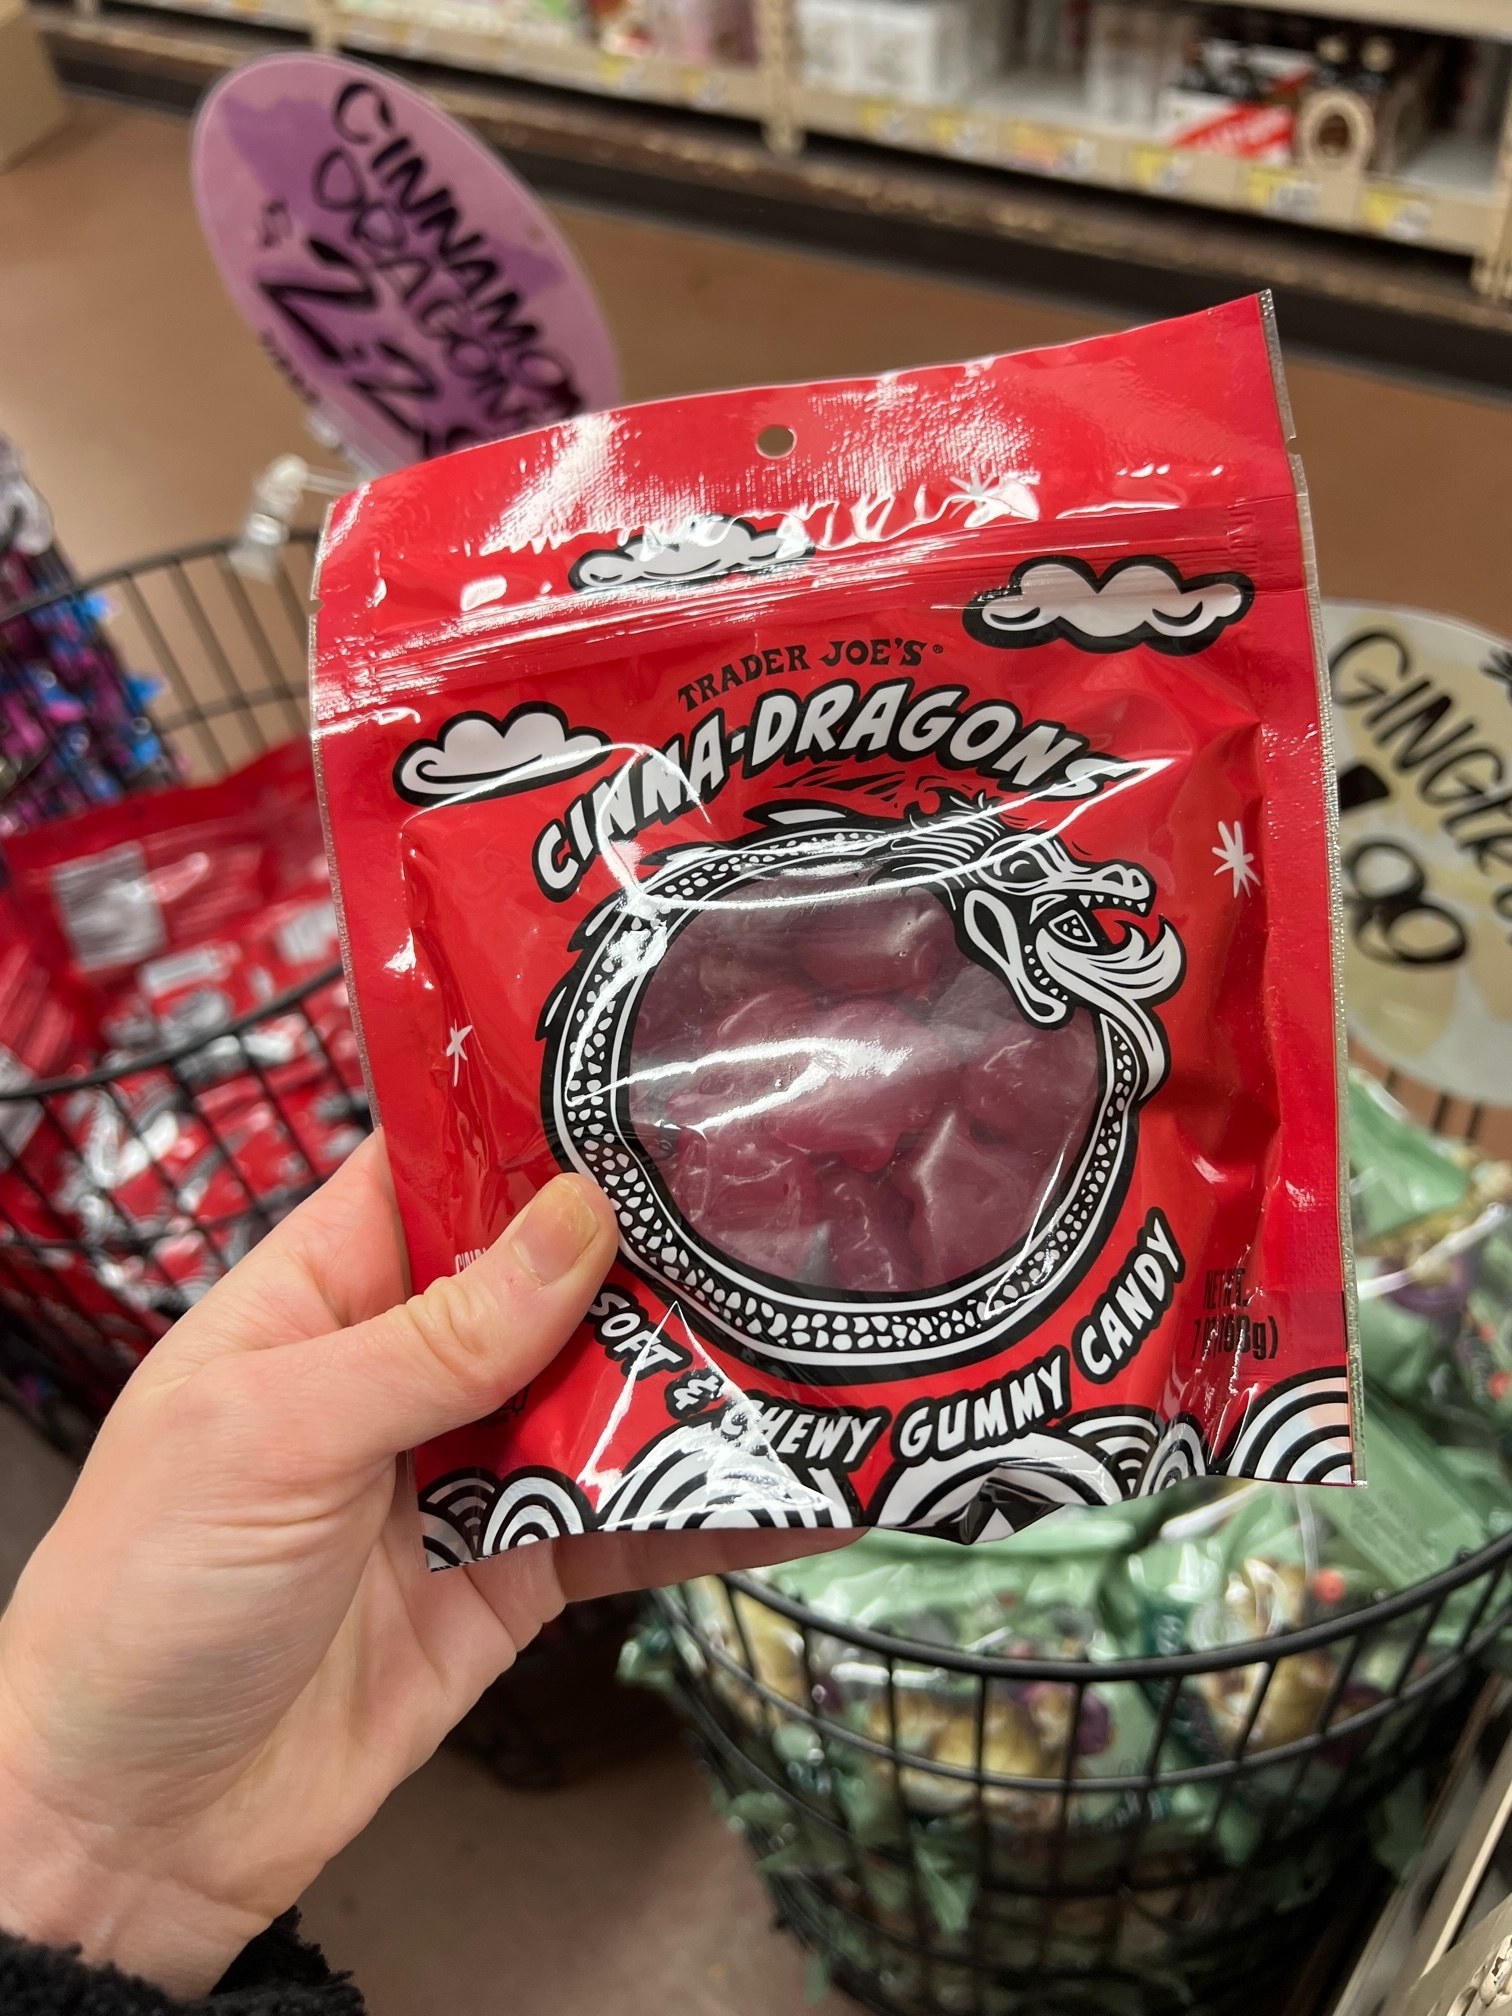 A bag of China Dragons gummy candy